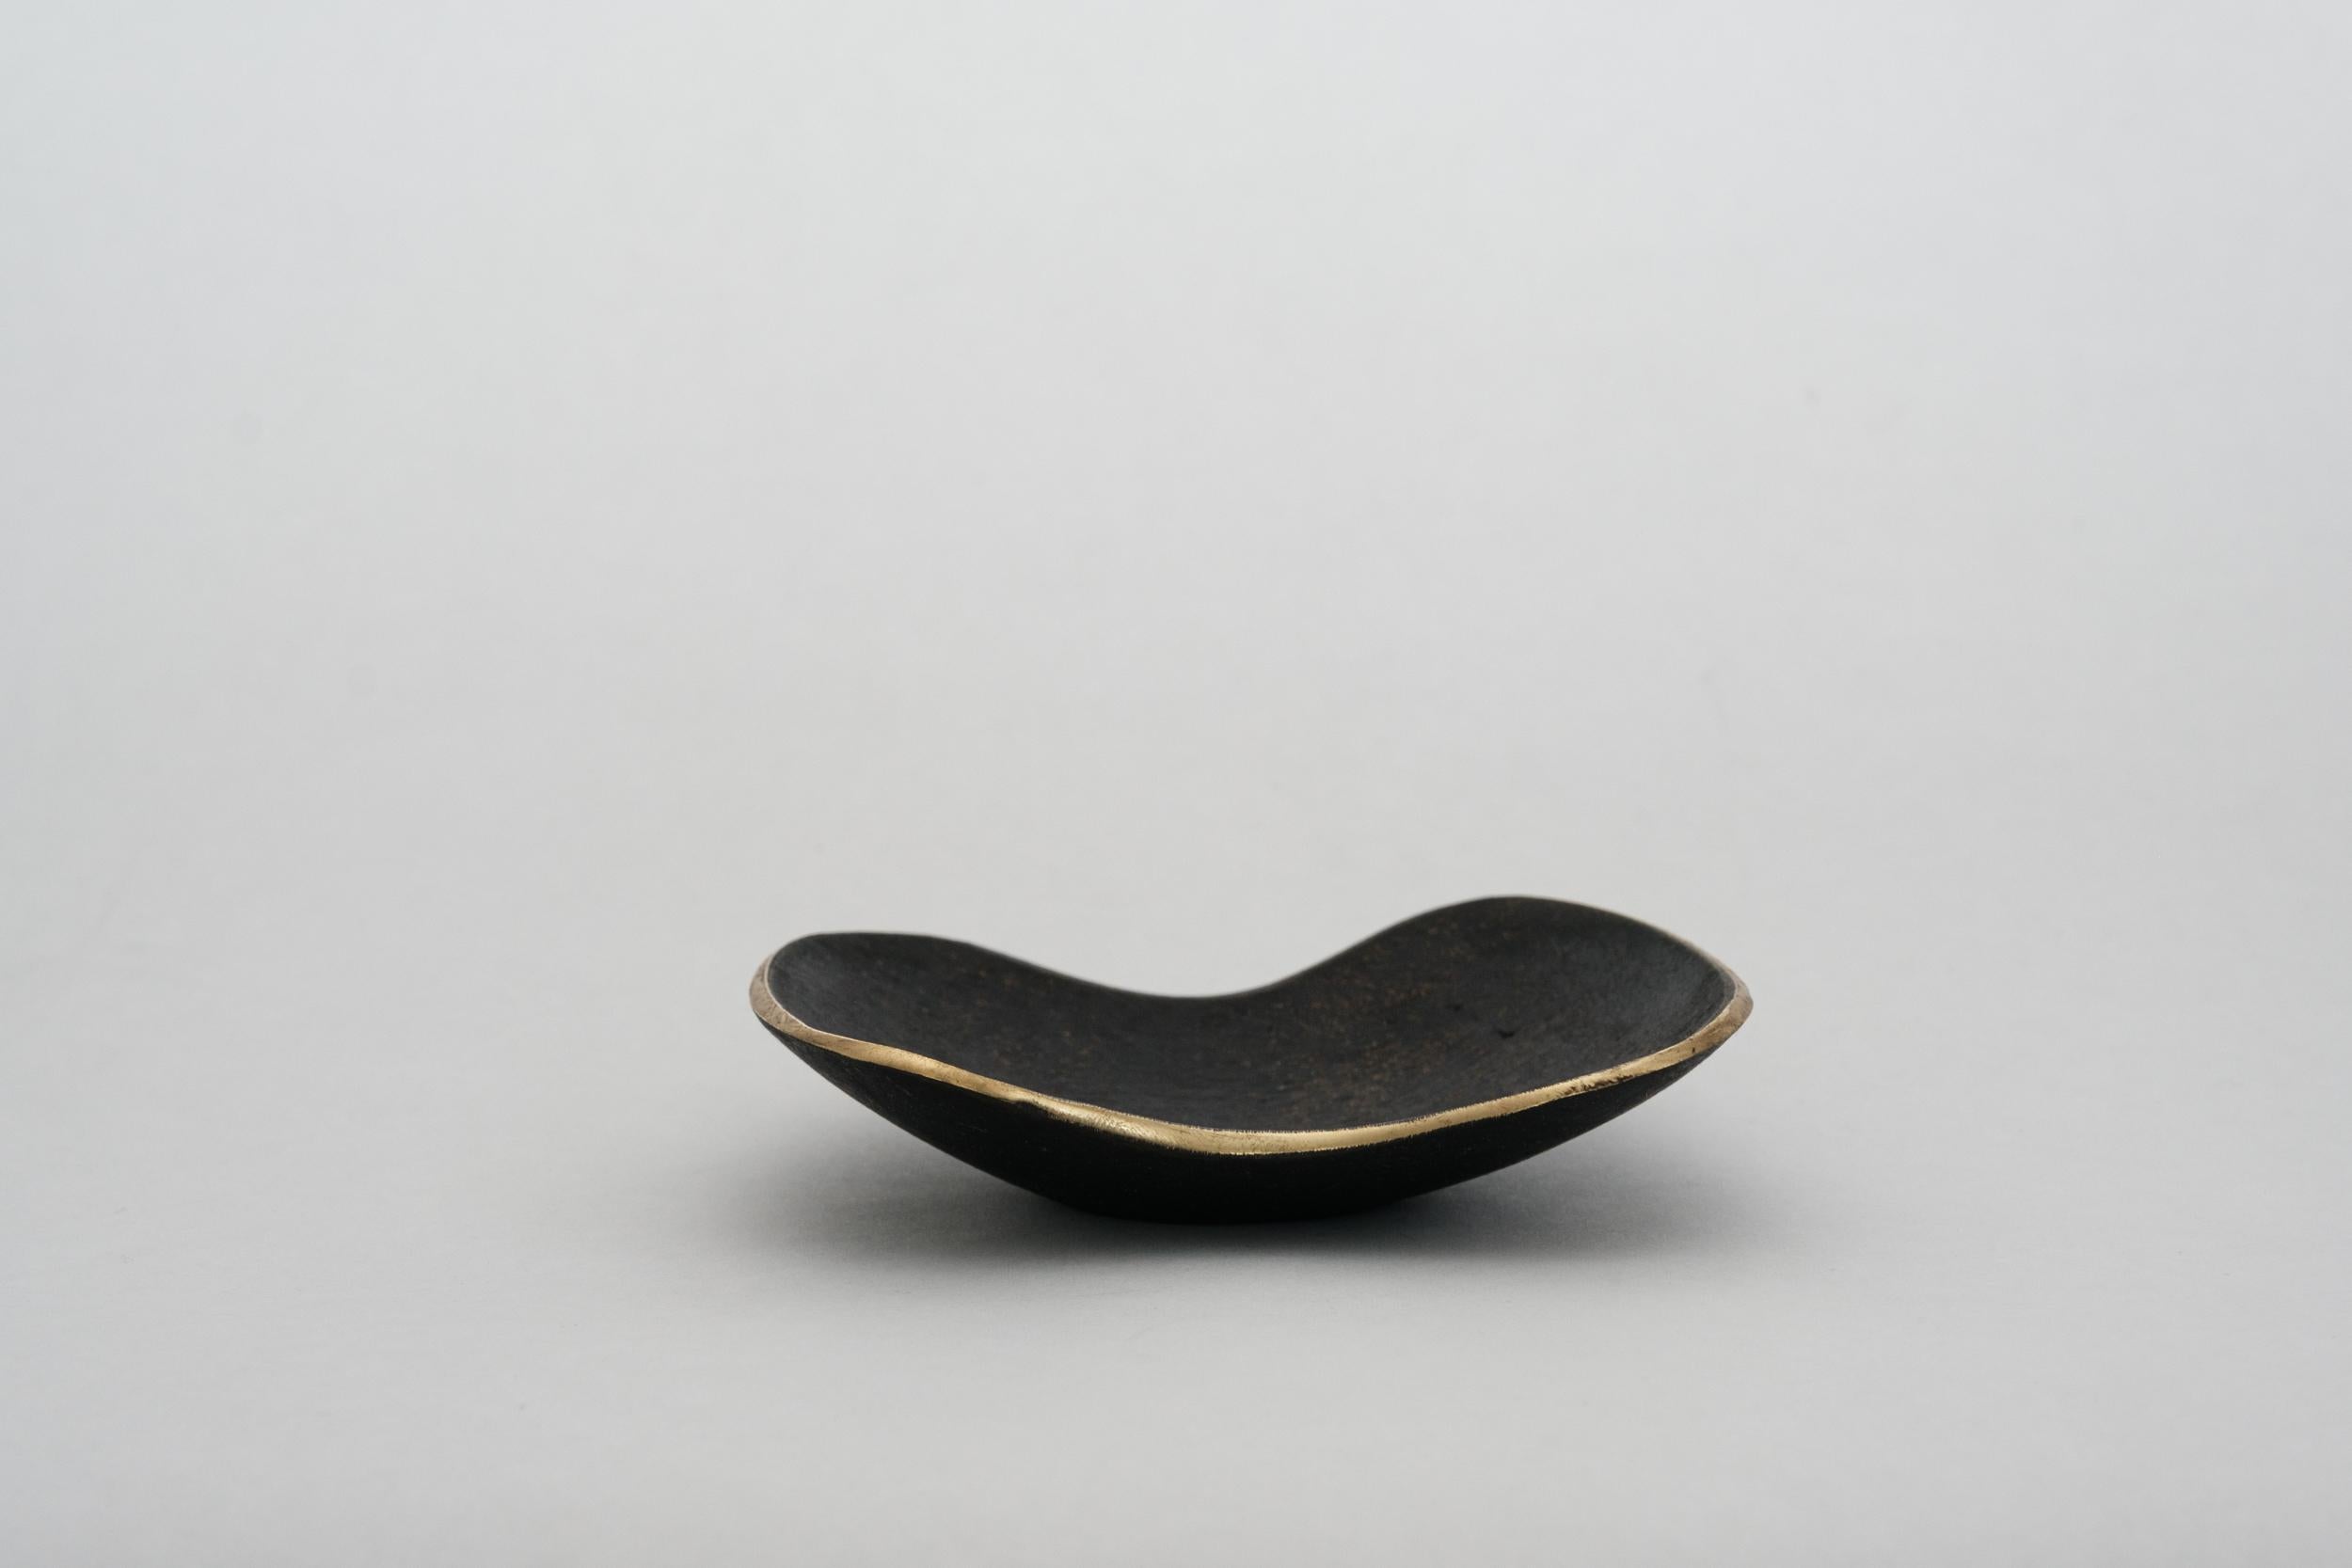 Carl Aubo¨ck Model #3979 patinated brass bowl. Designed in the 1950s, this incredibly refined and sculptural Viennese bowl is executed in polished and darkly patinated brass. Originally conceived as an ashtray, this decorative vessel can be used for